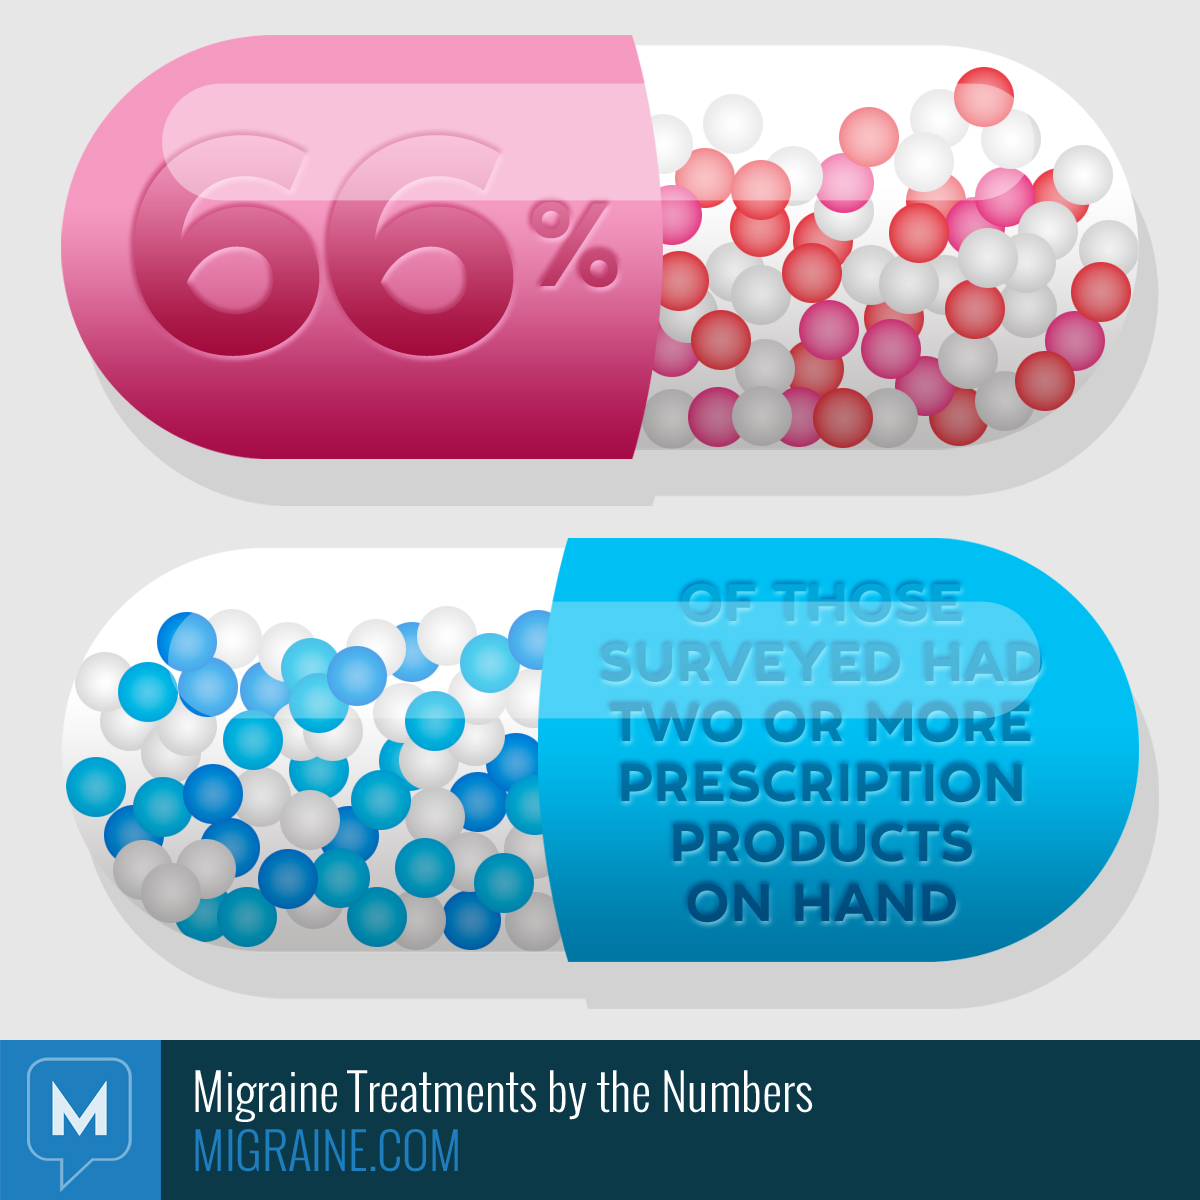 Migraine Treatments by the Numbers